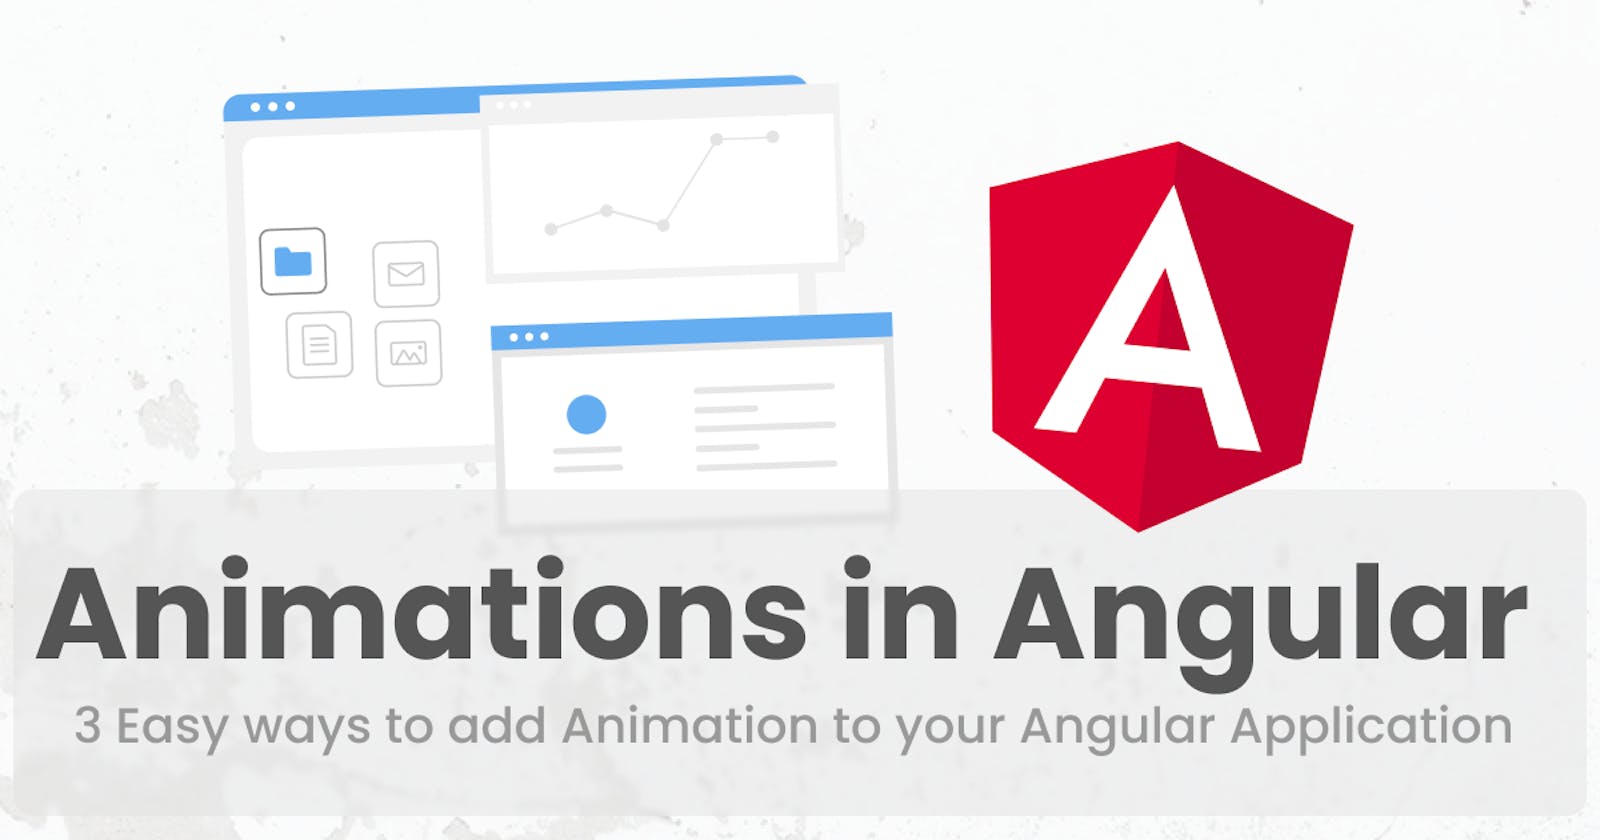 3 Easy Ways to Add Animation to your Angular Applications